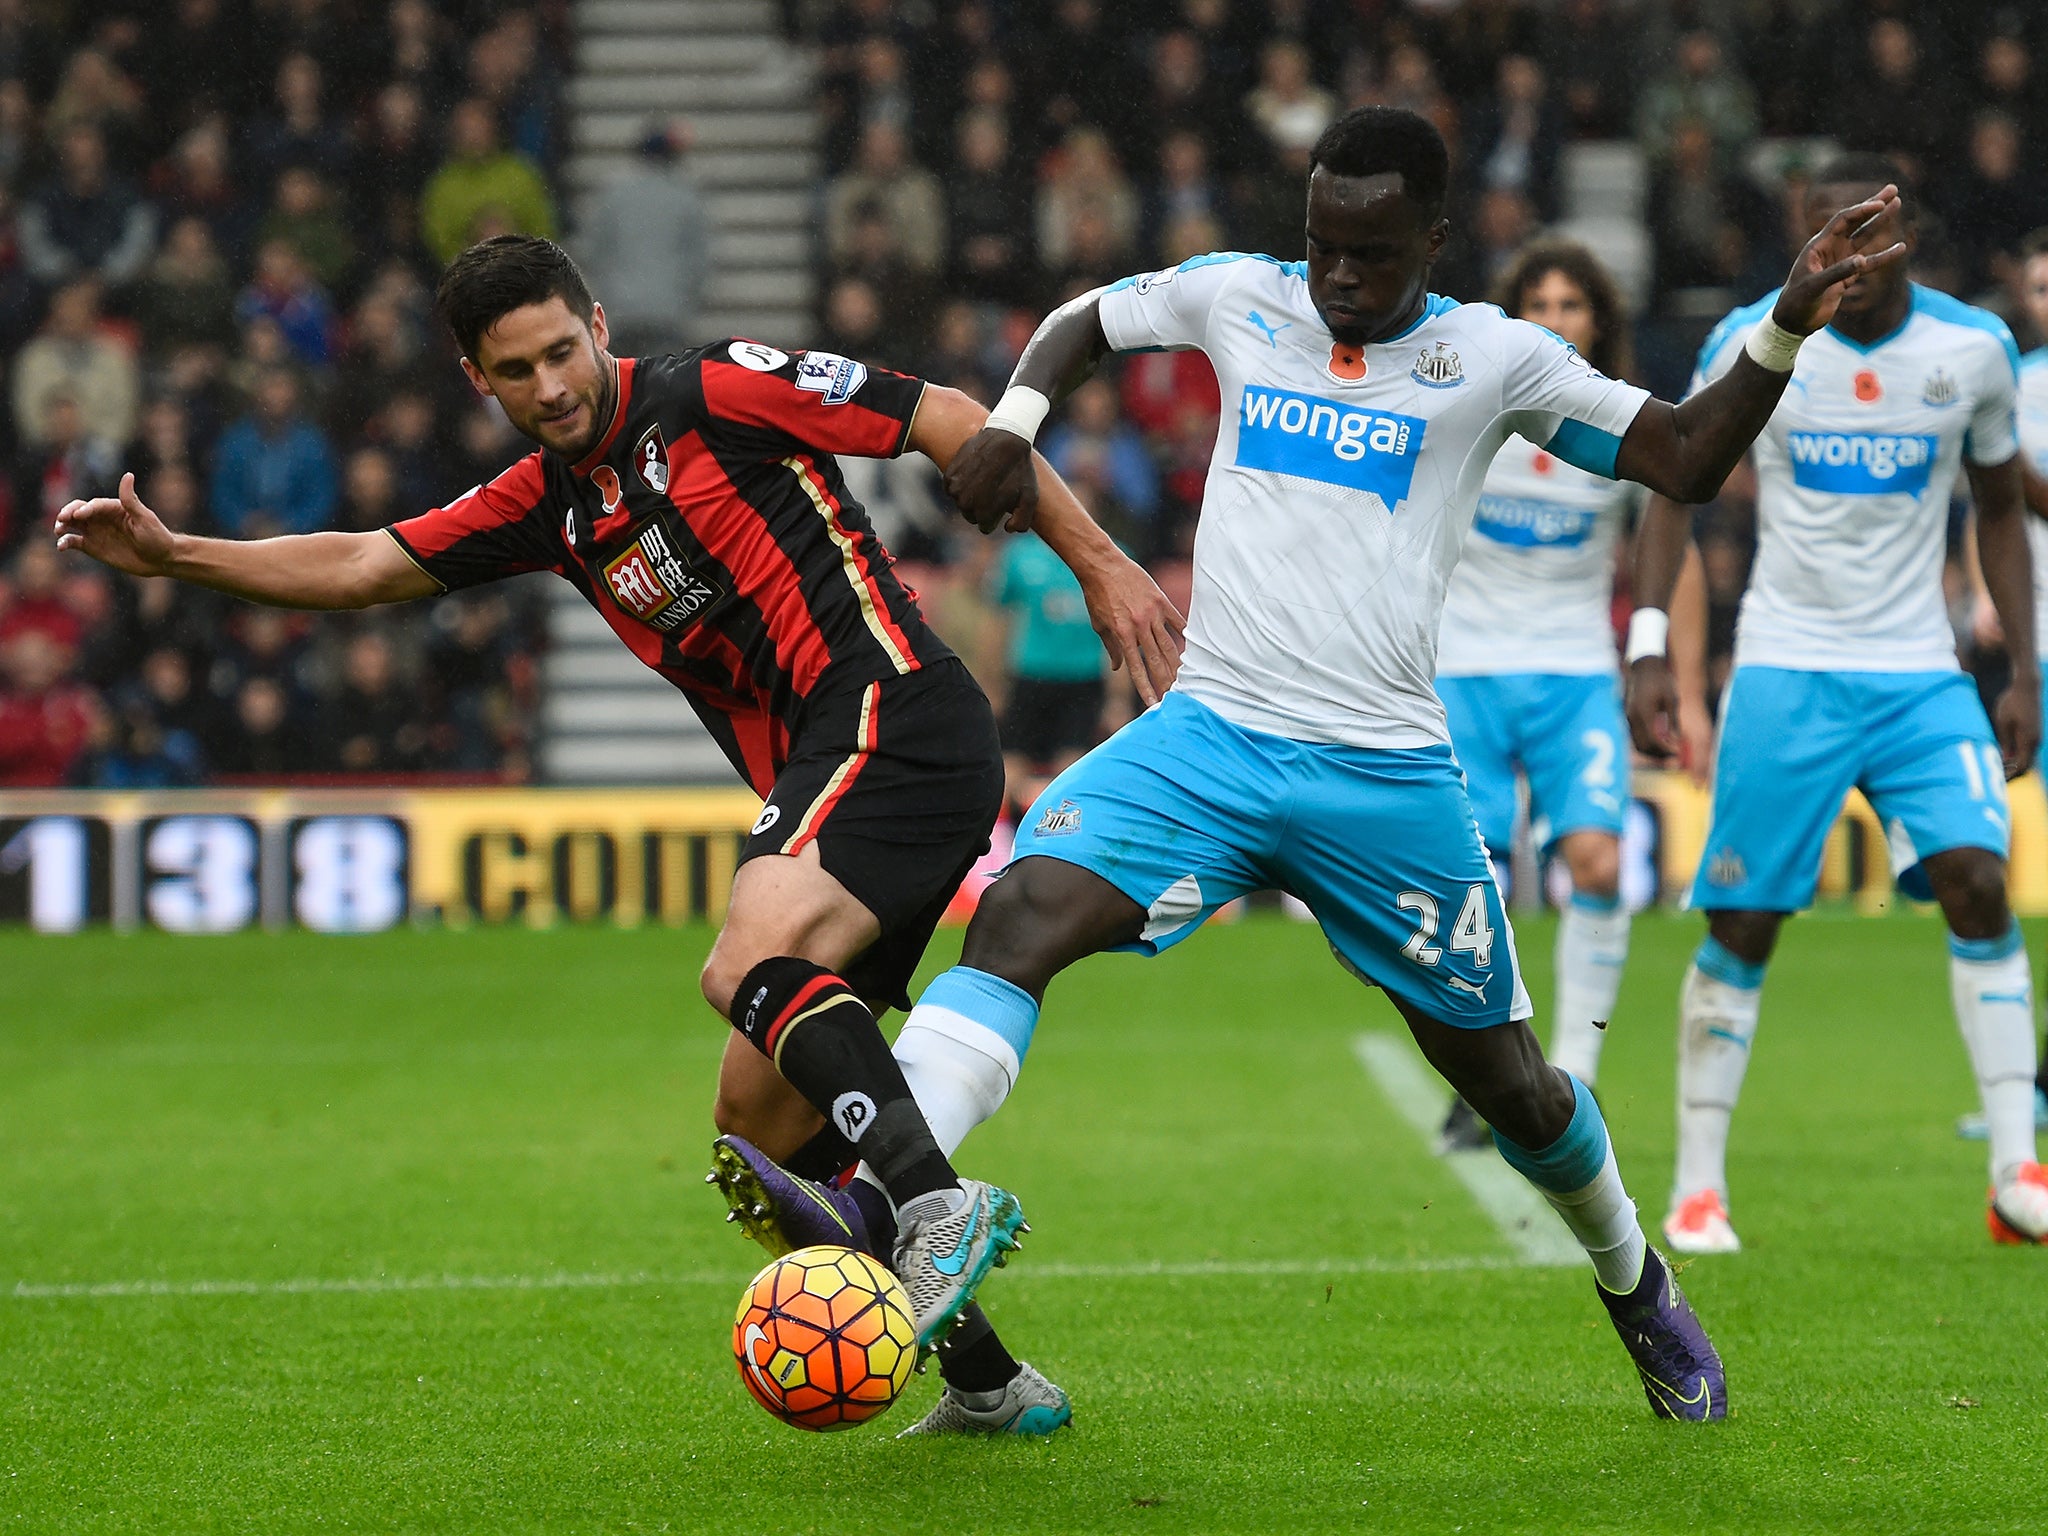 Chieck Tiote challenges Andrew Surman for the ball